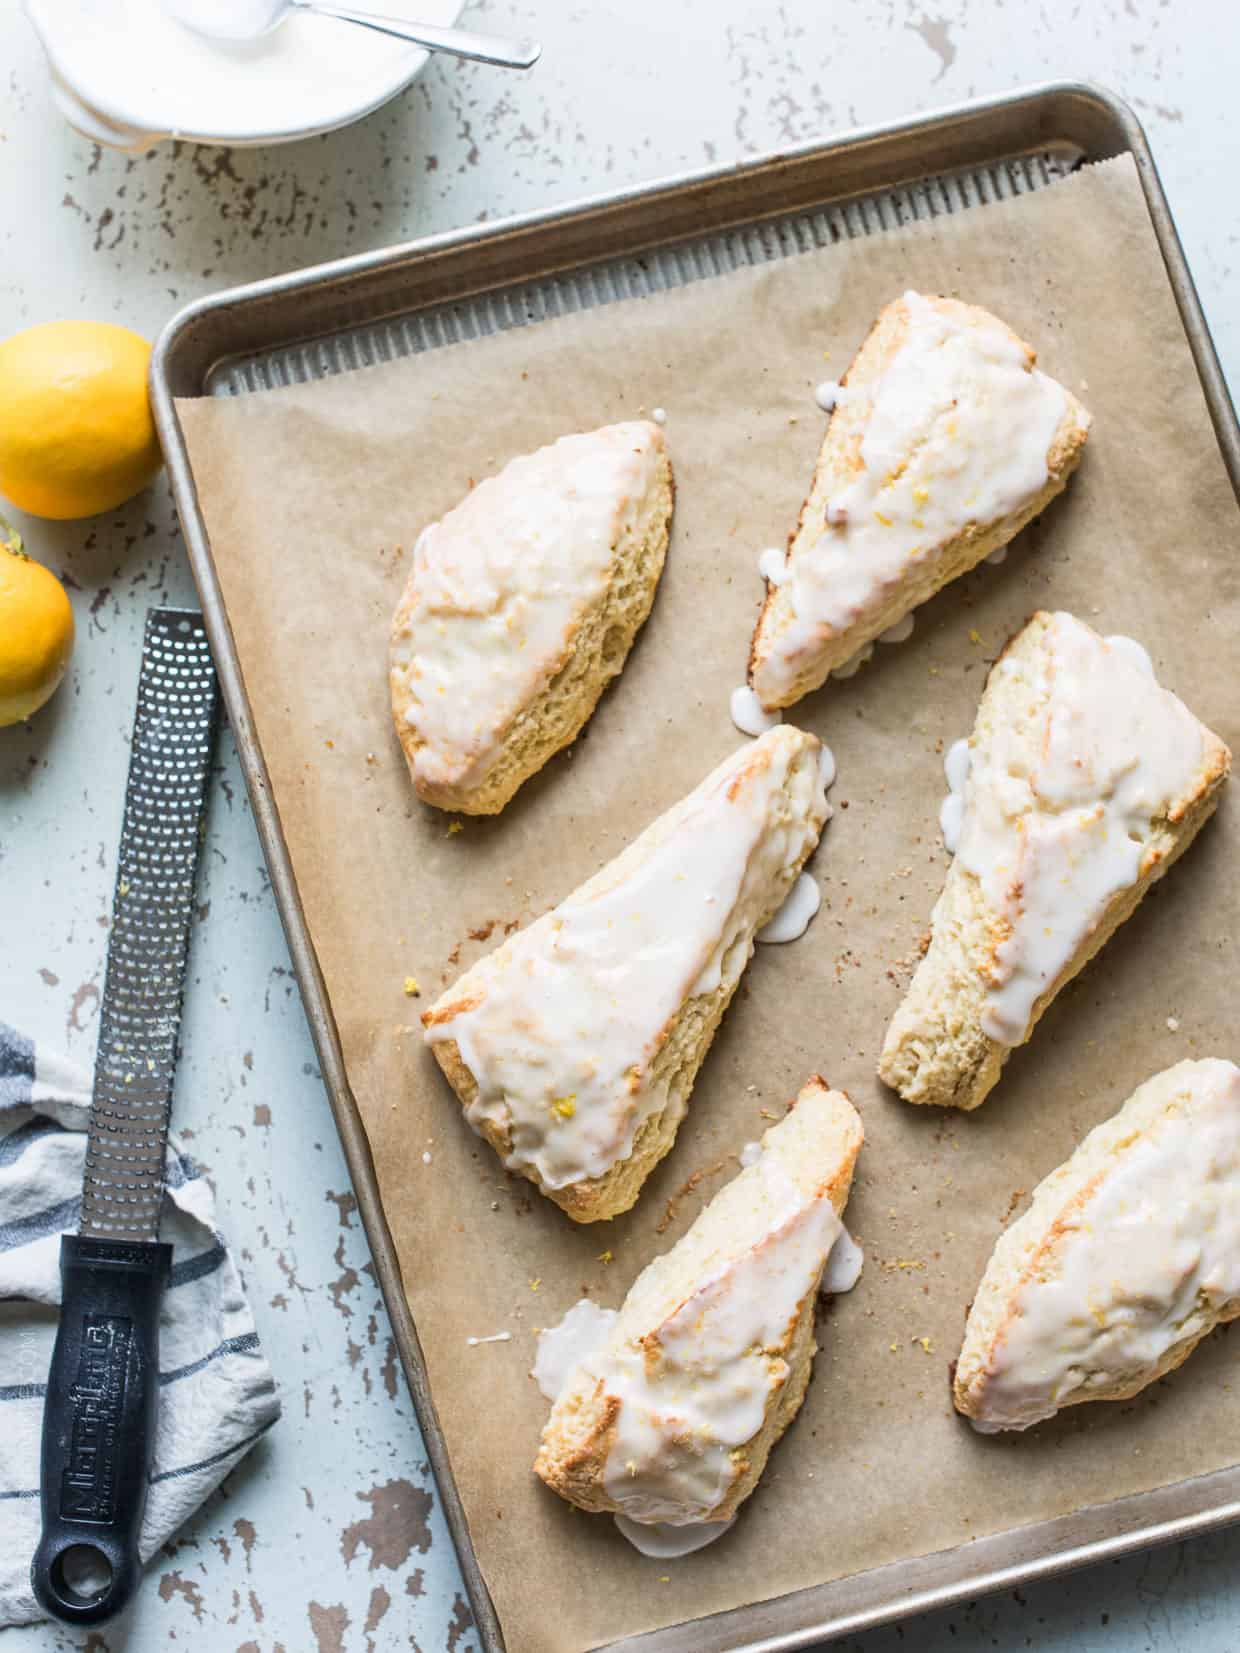 This recipe for Meyer Lemon Ricotta Scones will brighten up any winter morning with its moist, tender crumb and sweet lemon glaze.